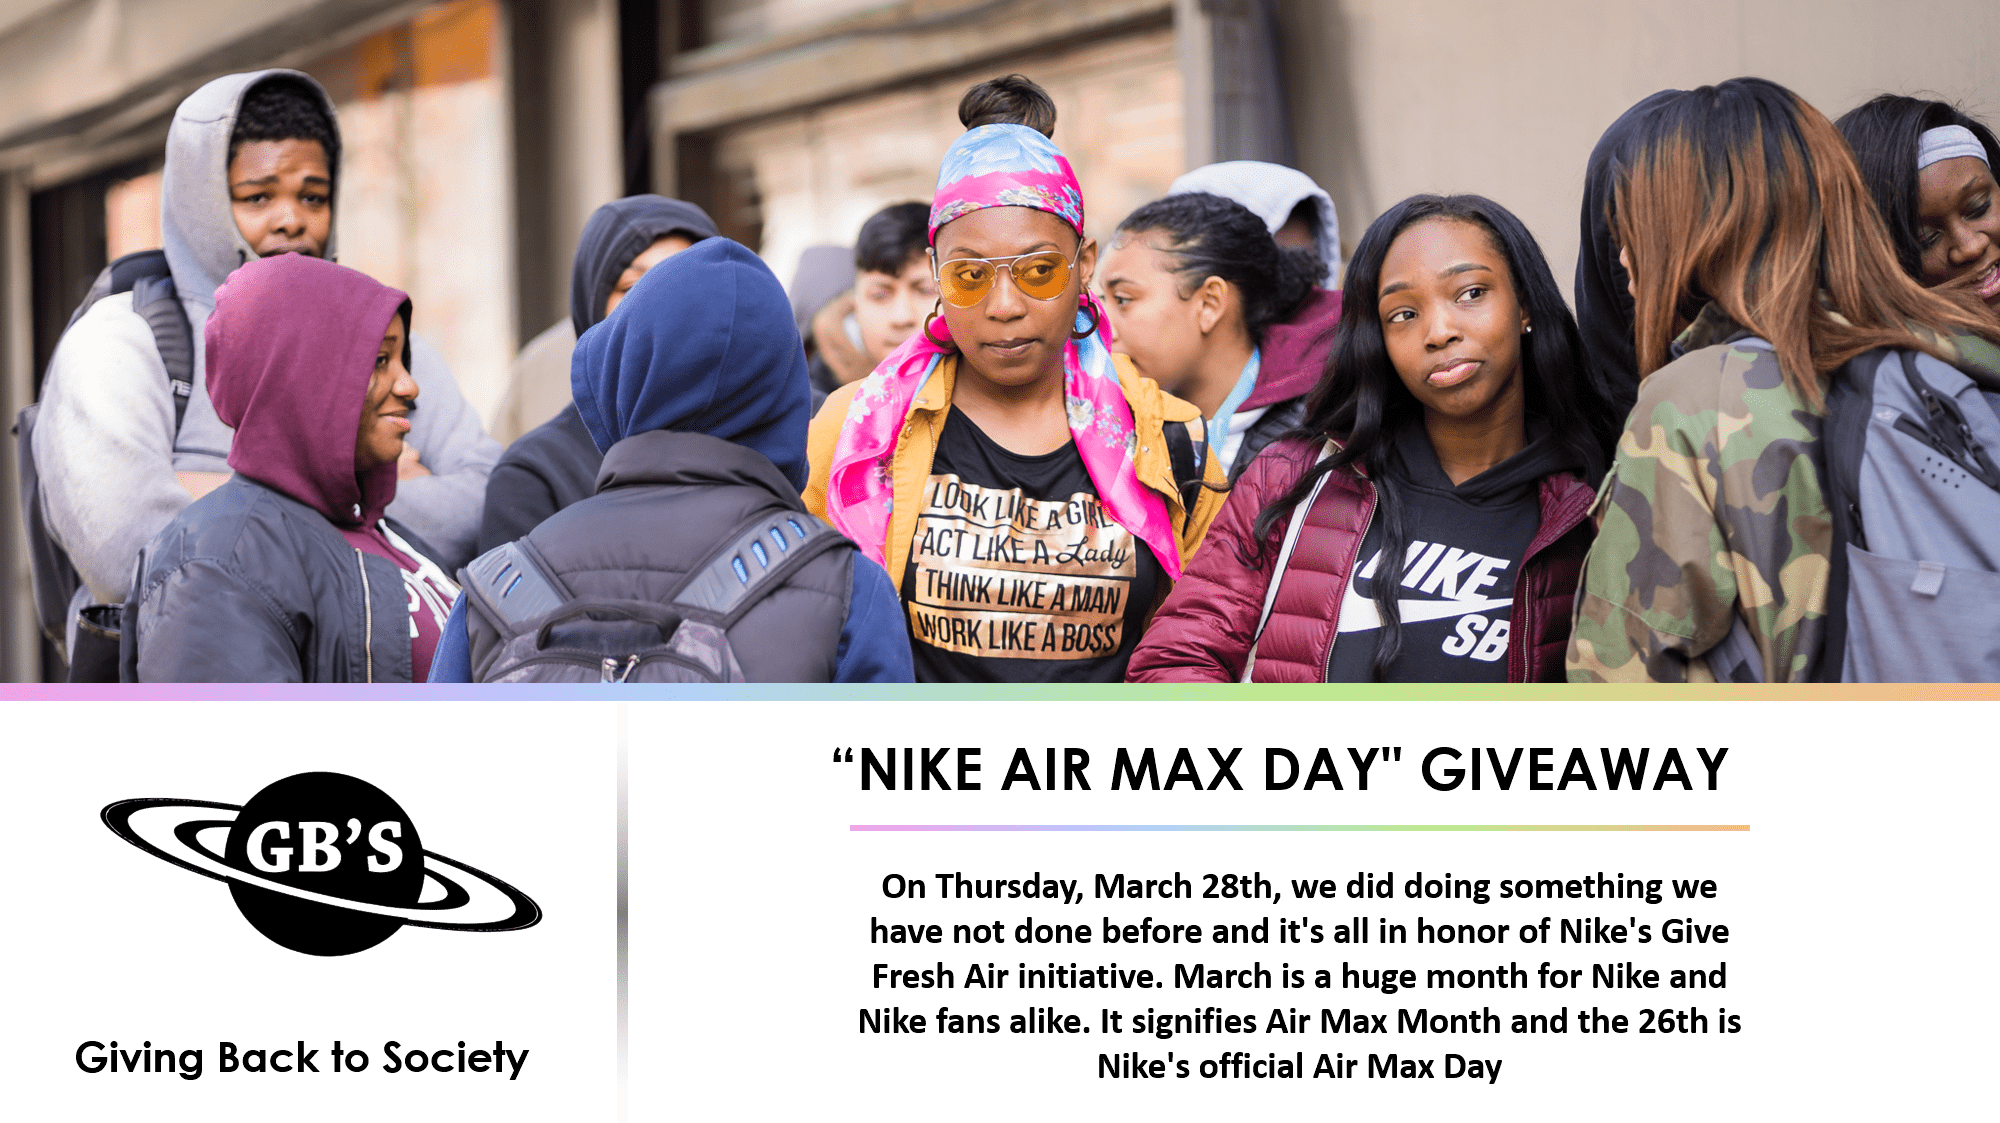 GB'S "Nike Air Max Day" Giveaway